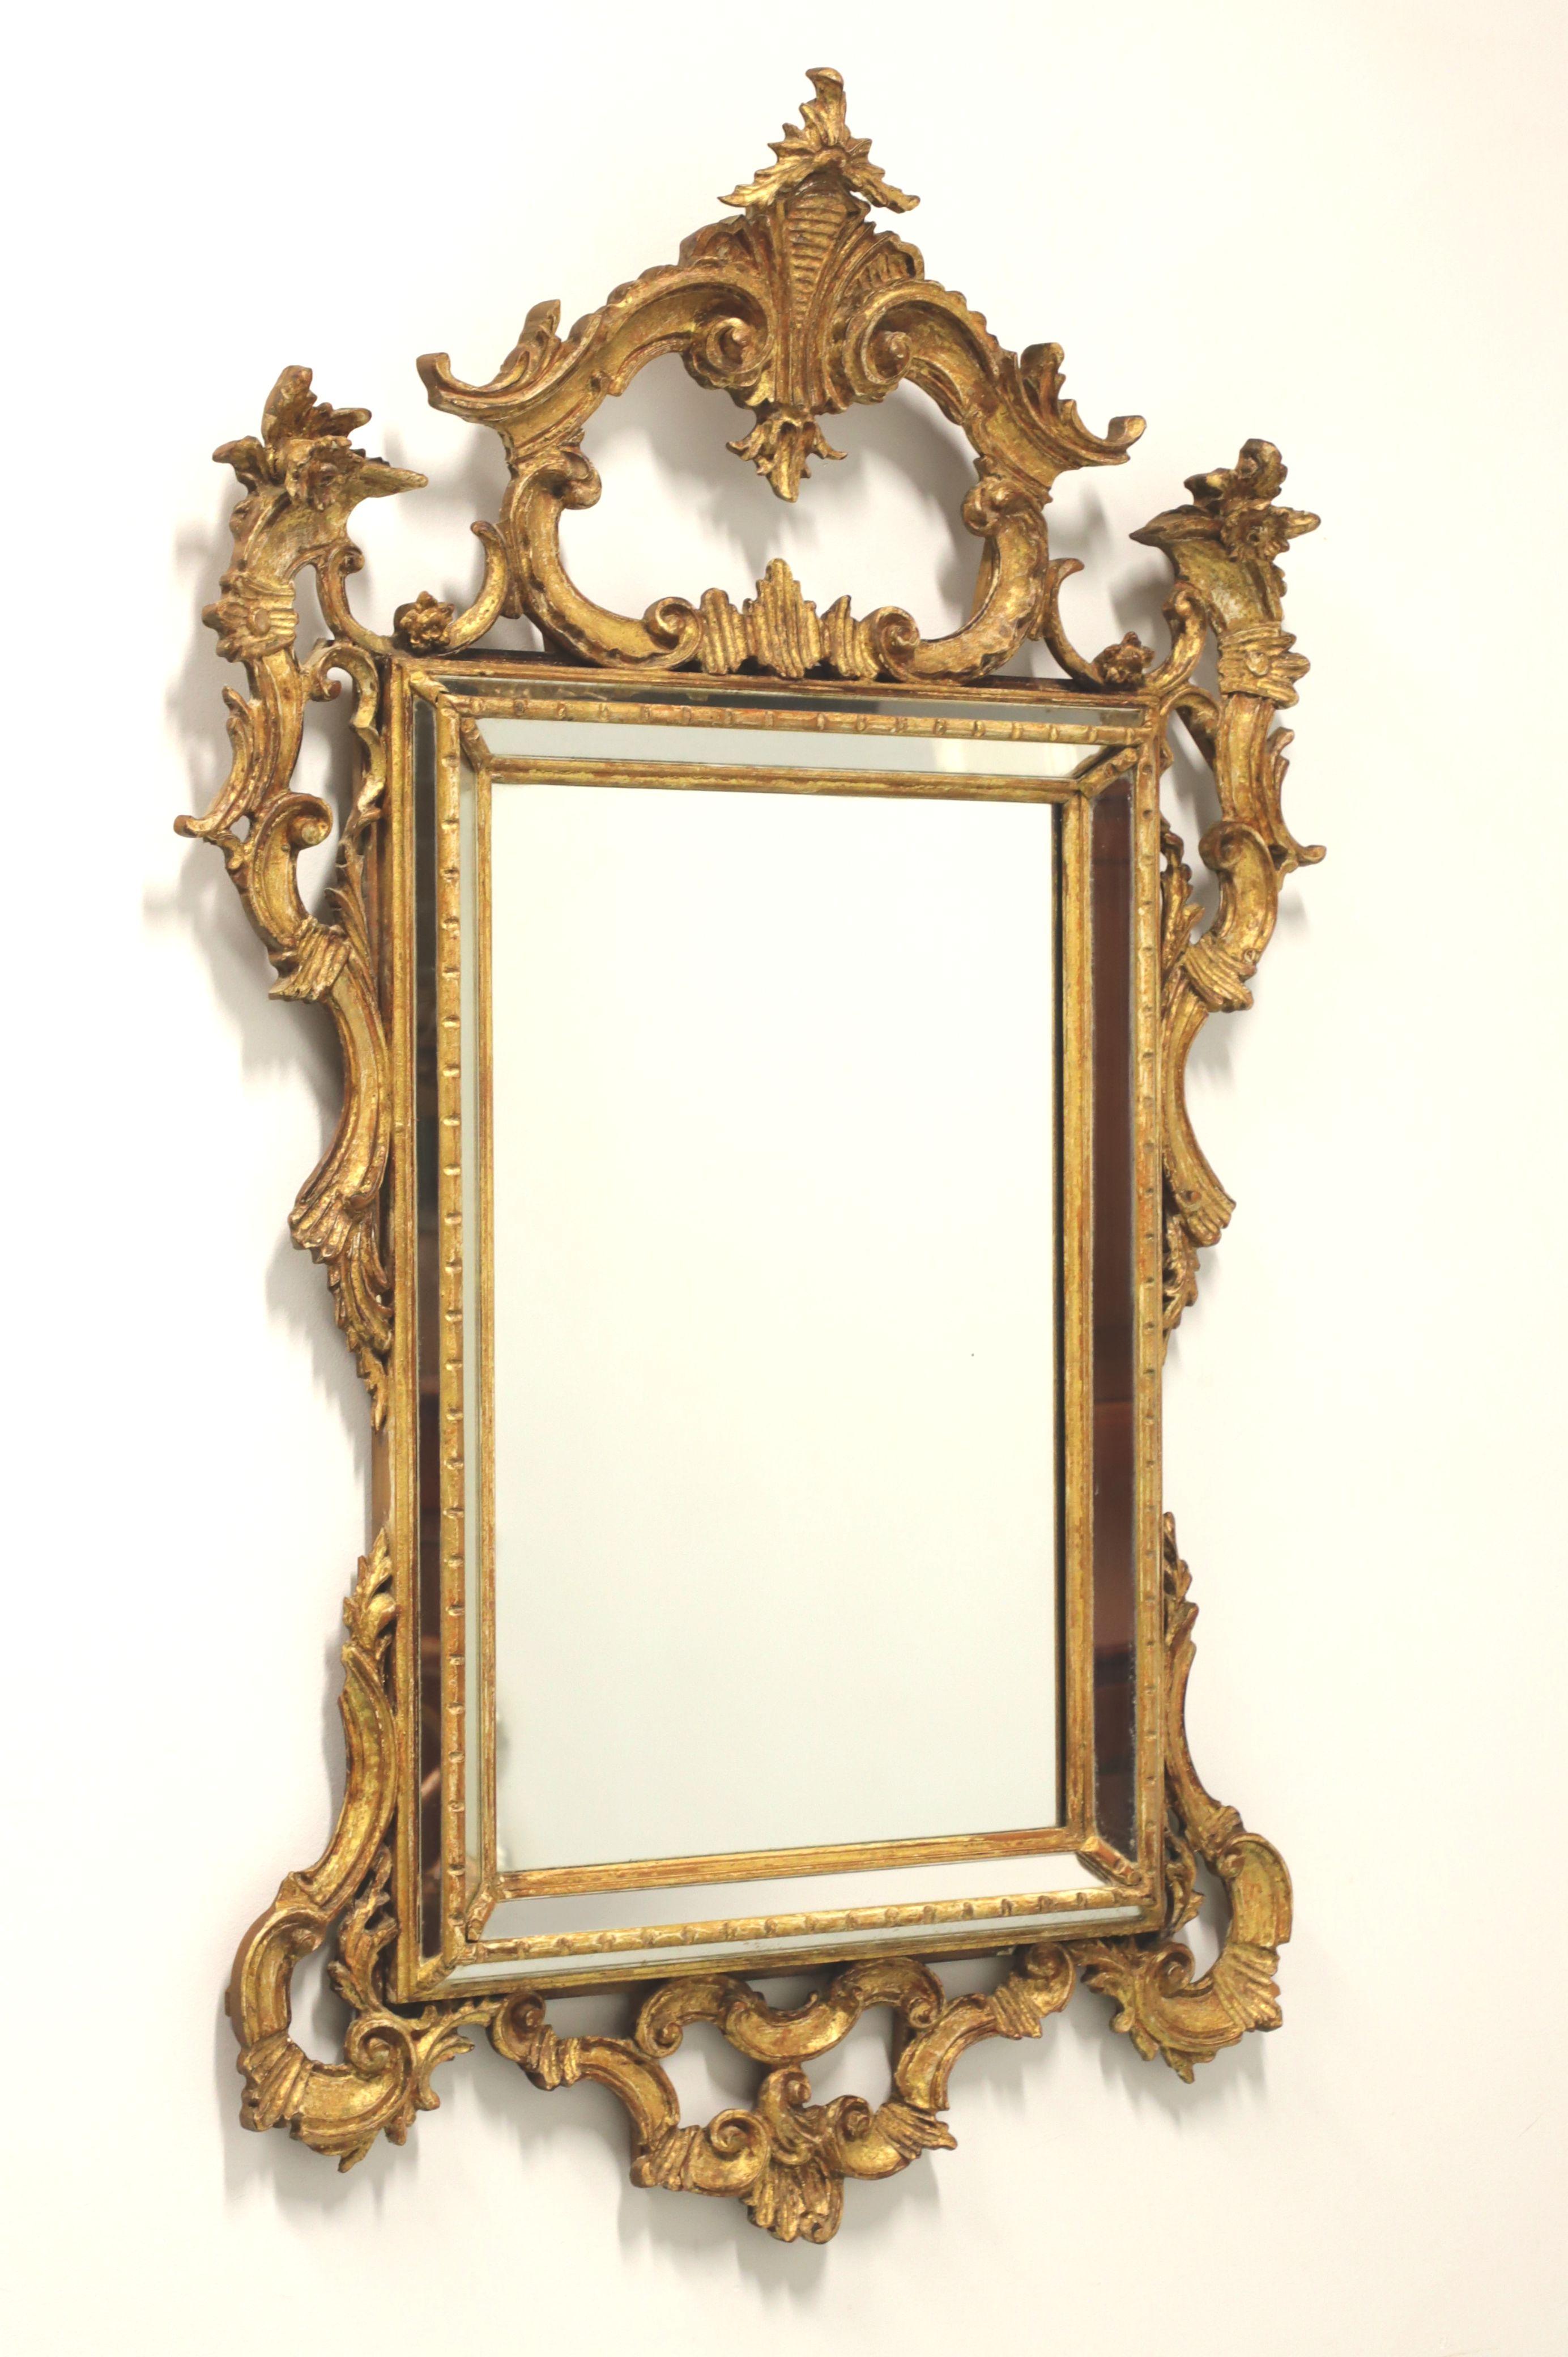 LABARGE 1960's Gold Carved French Louis XV Rococo Parclose Wall Mirror - A 4